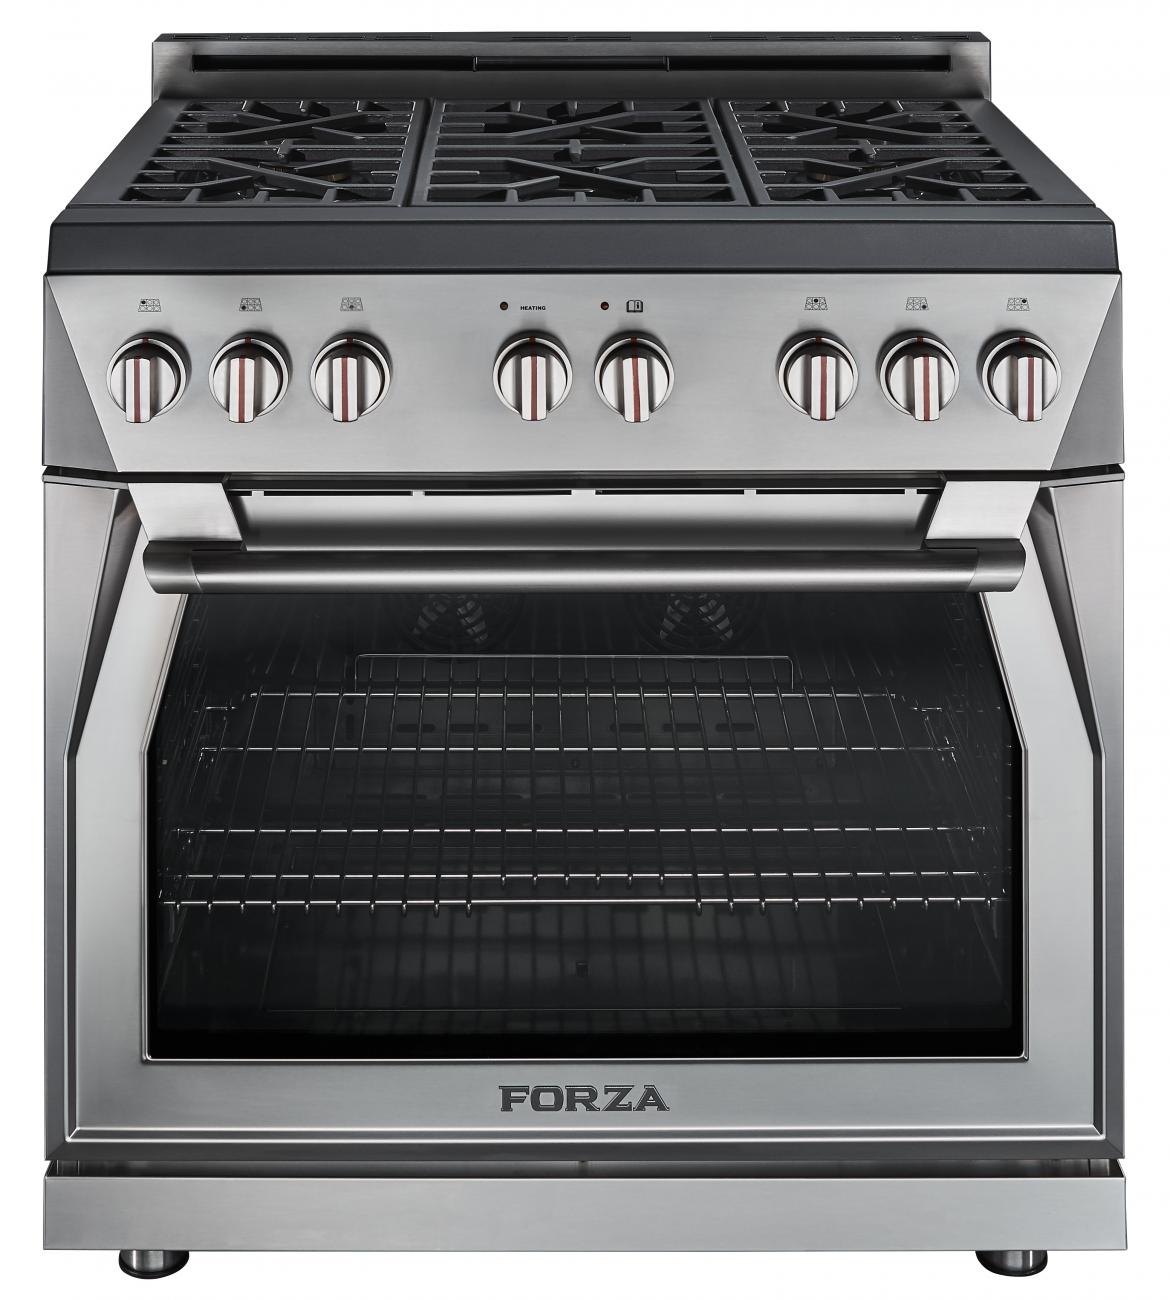 Forza 36 inch Range stainless steel